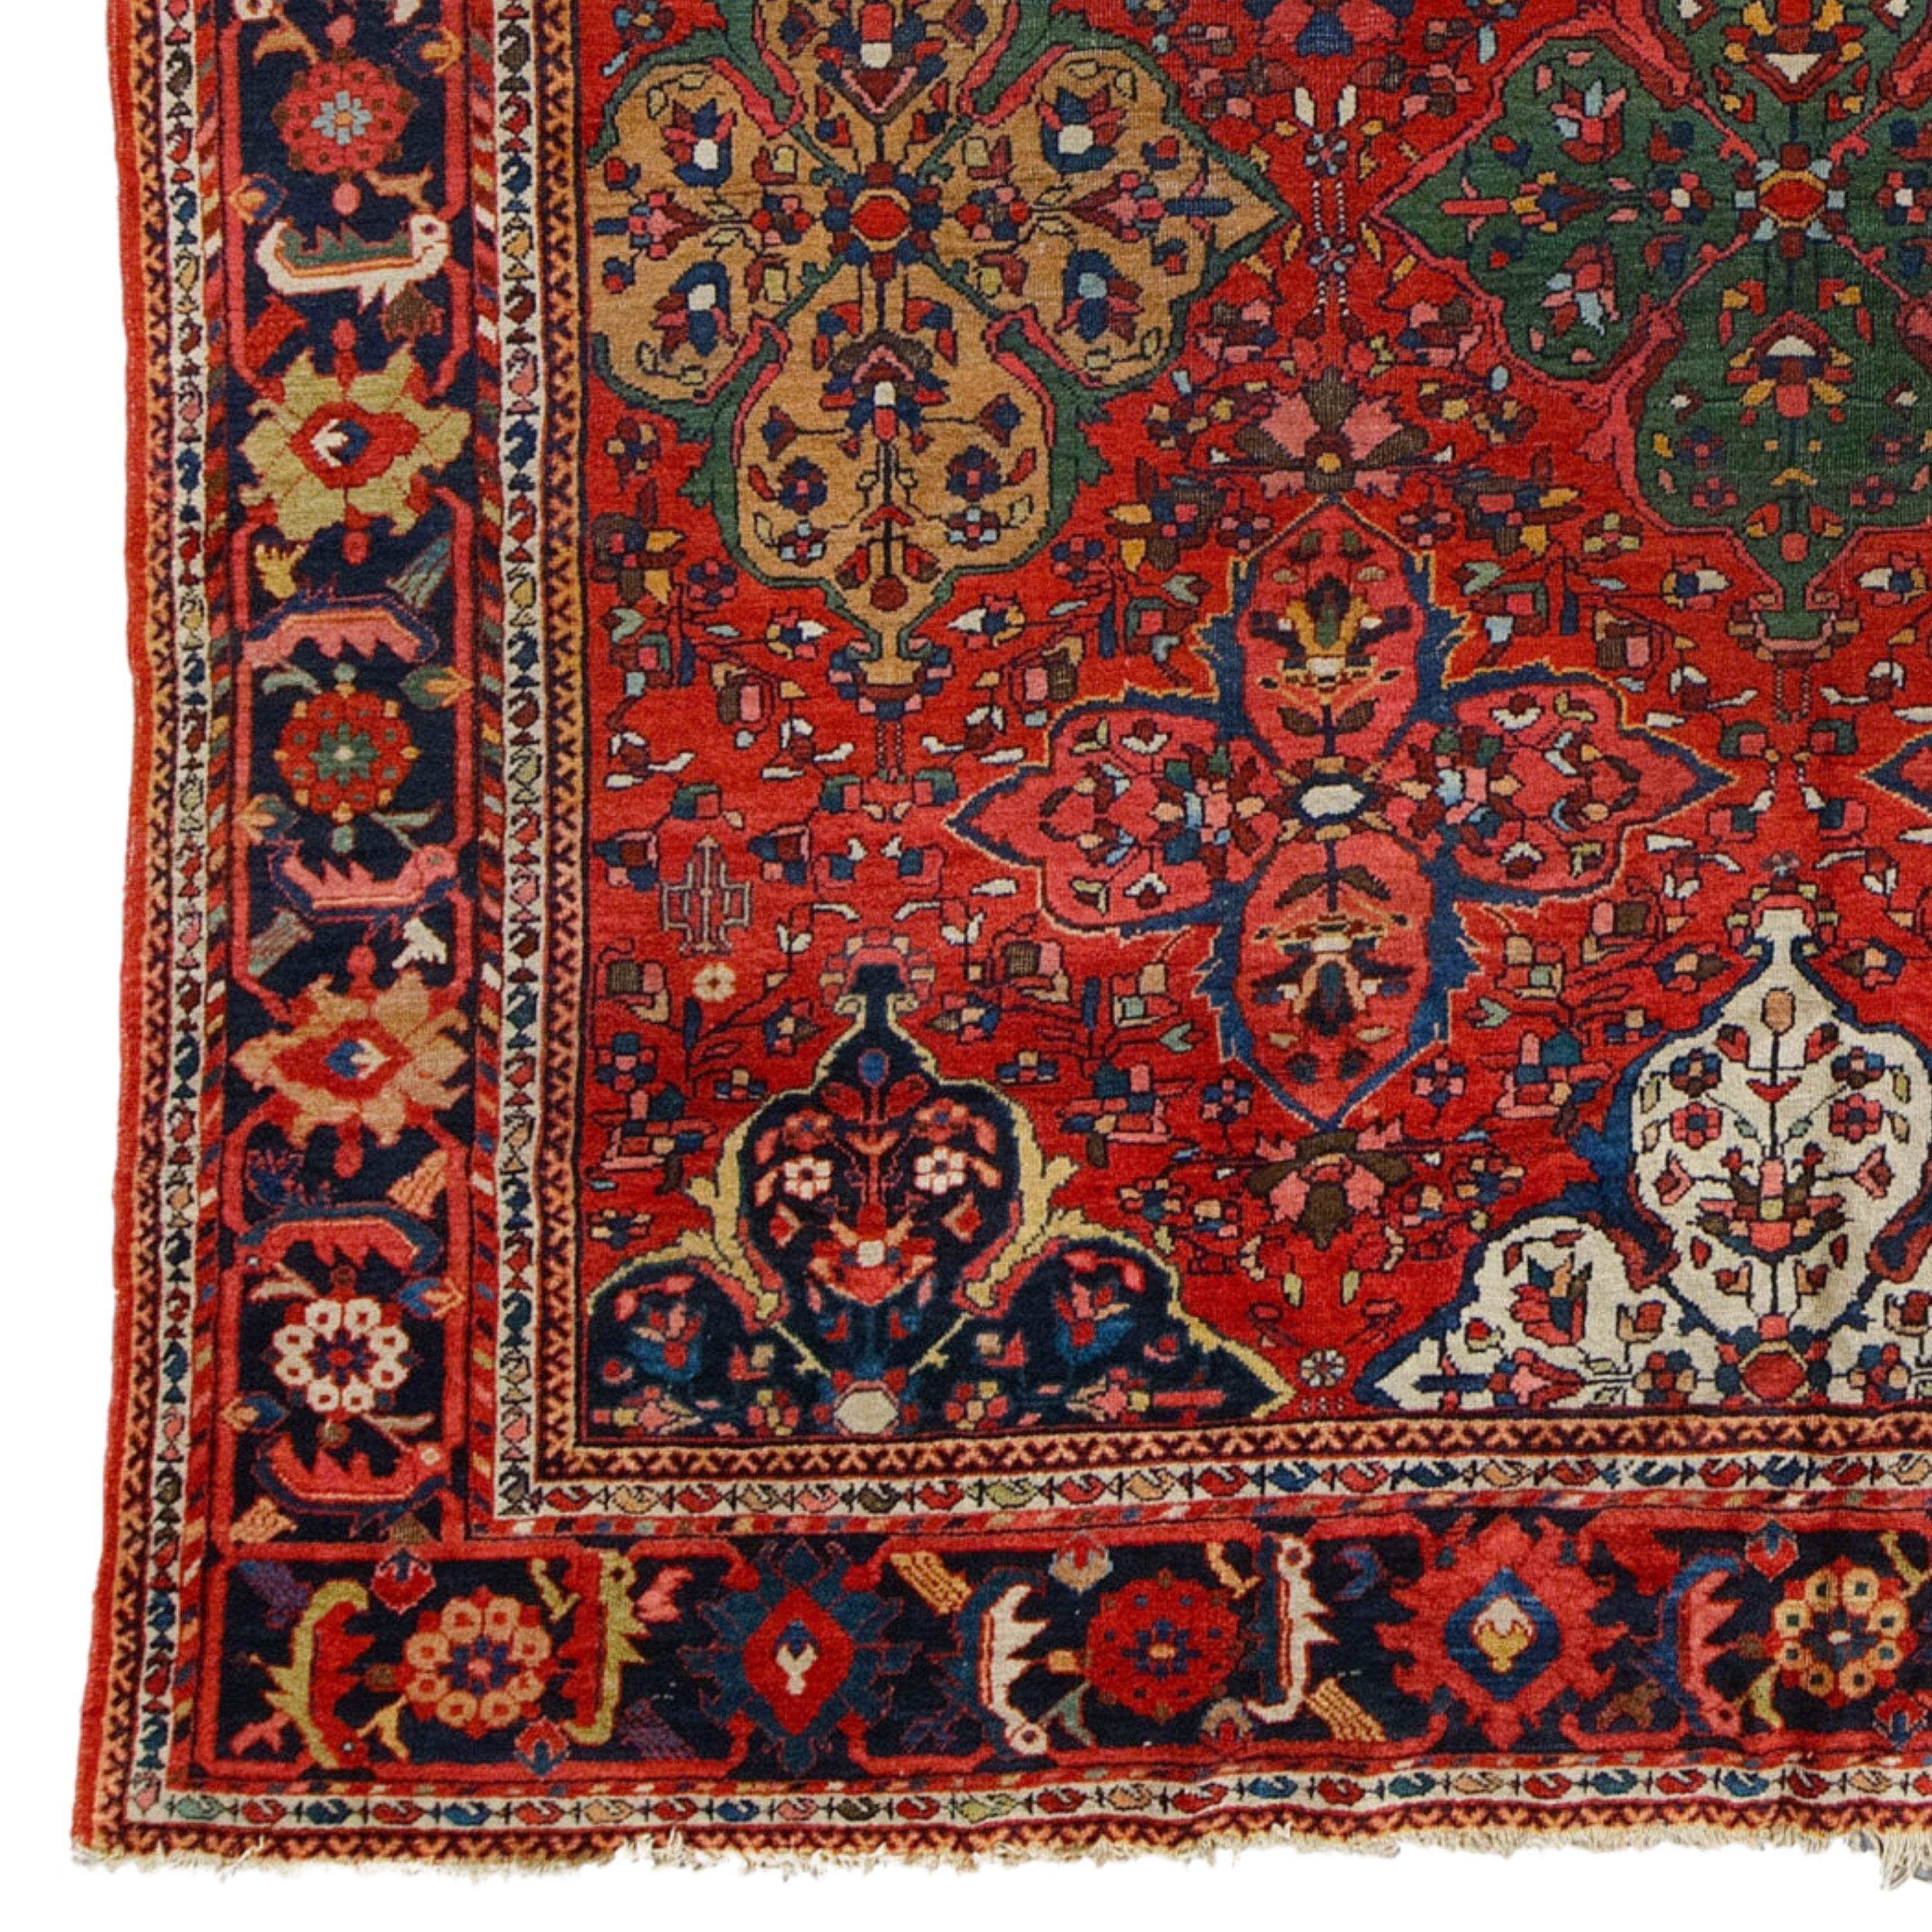 Late of 19th Century Mahal Carpet

This magnificent antique Mahal carpet is a work of art woven in the late 19th century. Each thread tells a story that reflects the artistry and craftsmanship of its time. Vibrant colors and intricate patterns